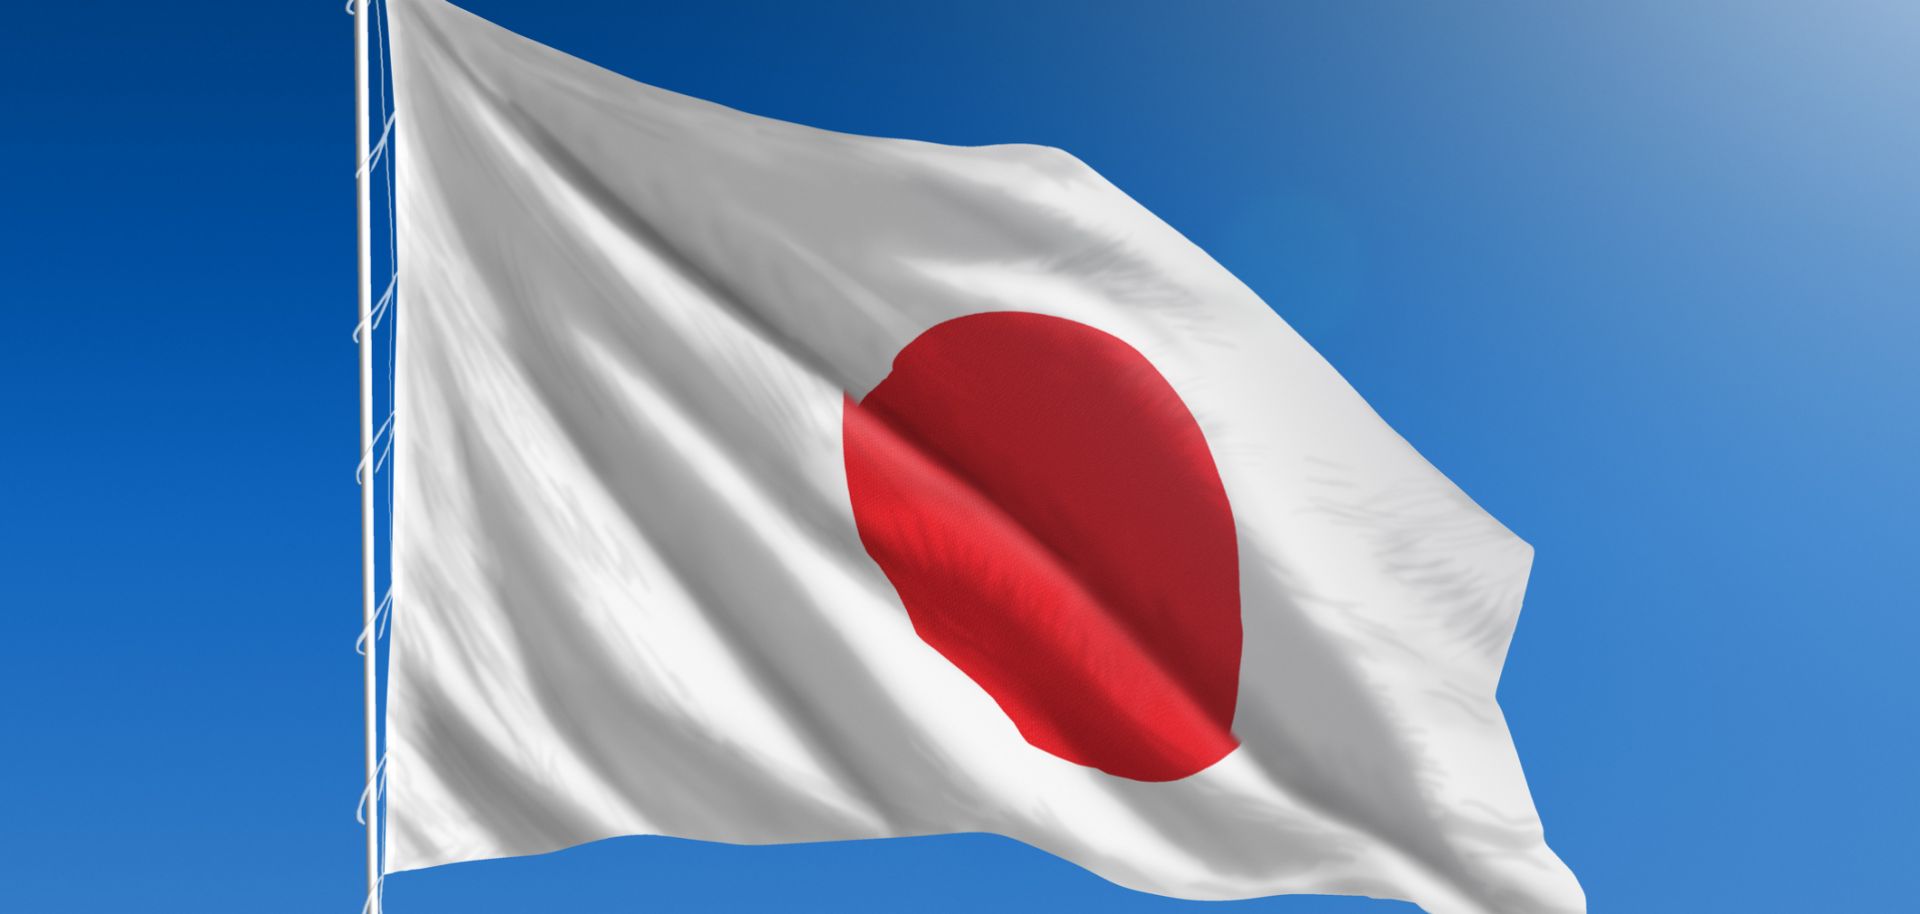 The Japanese flag, a red dot on a white background, celebrates the country's nickname: The Land of the Rising Sun. 